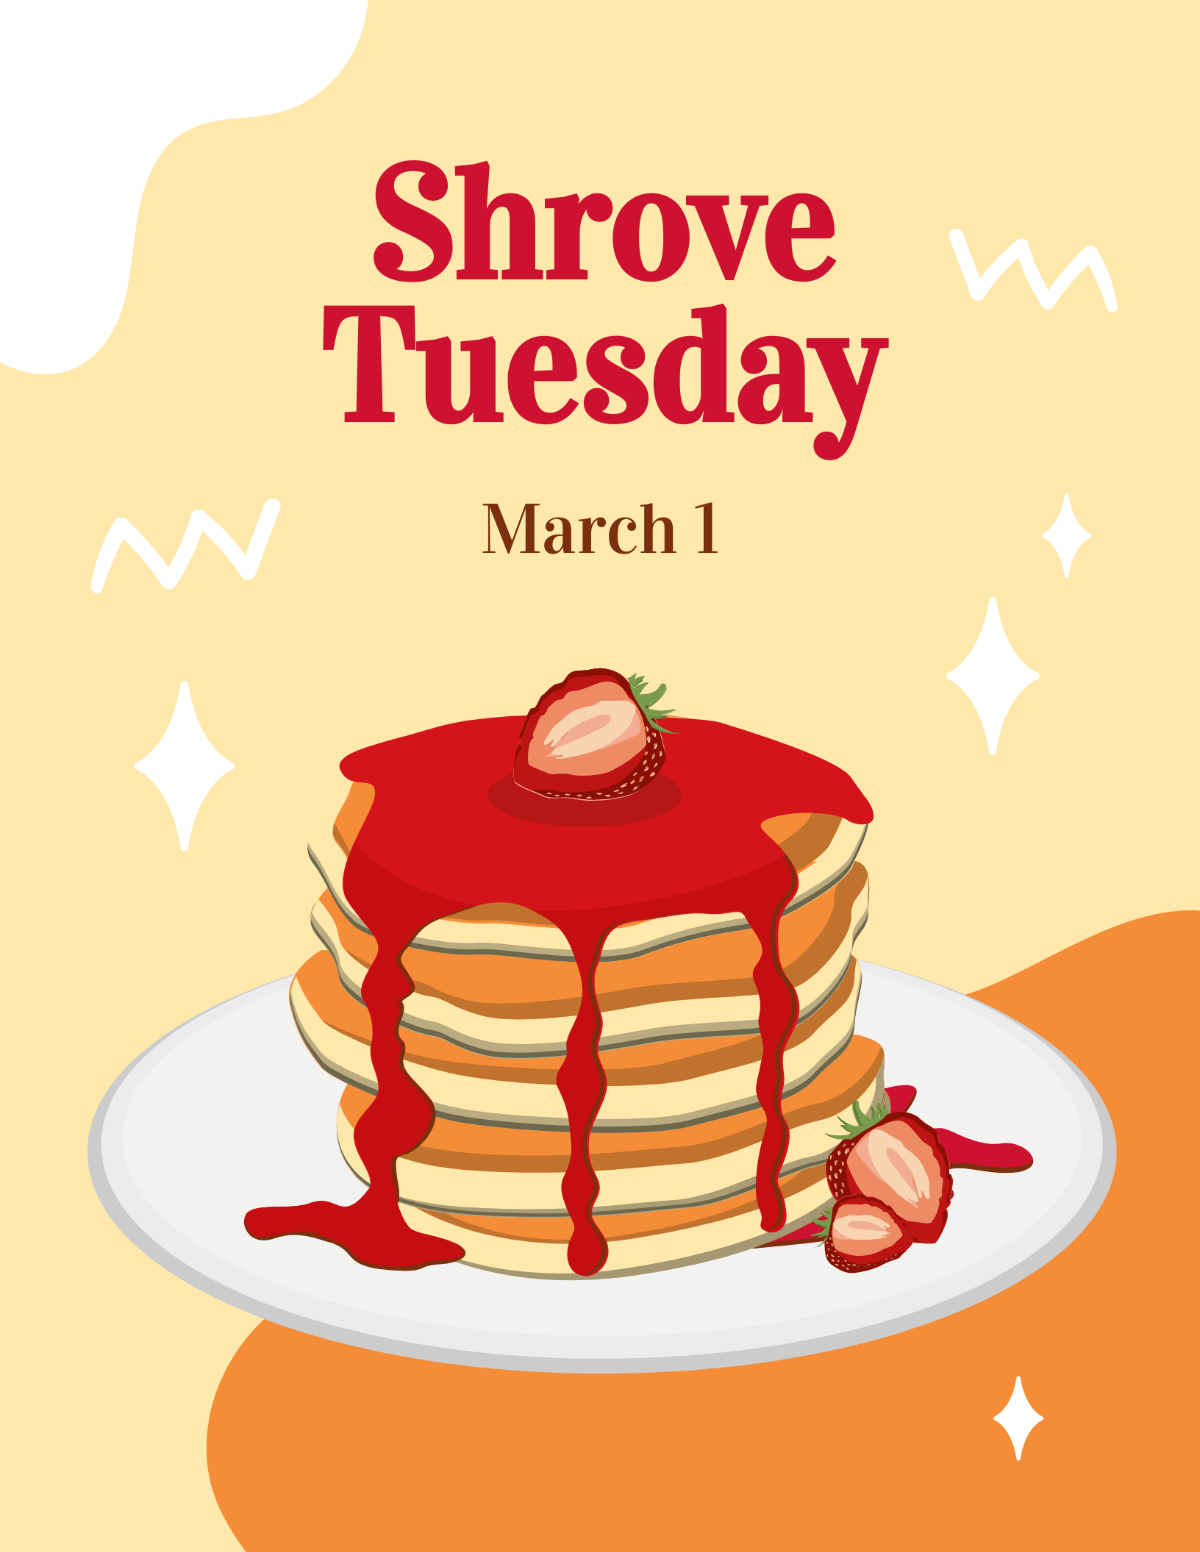 Free Shrove Tuesday Flyer Template